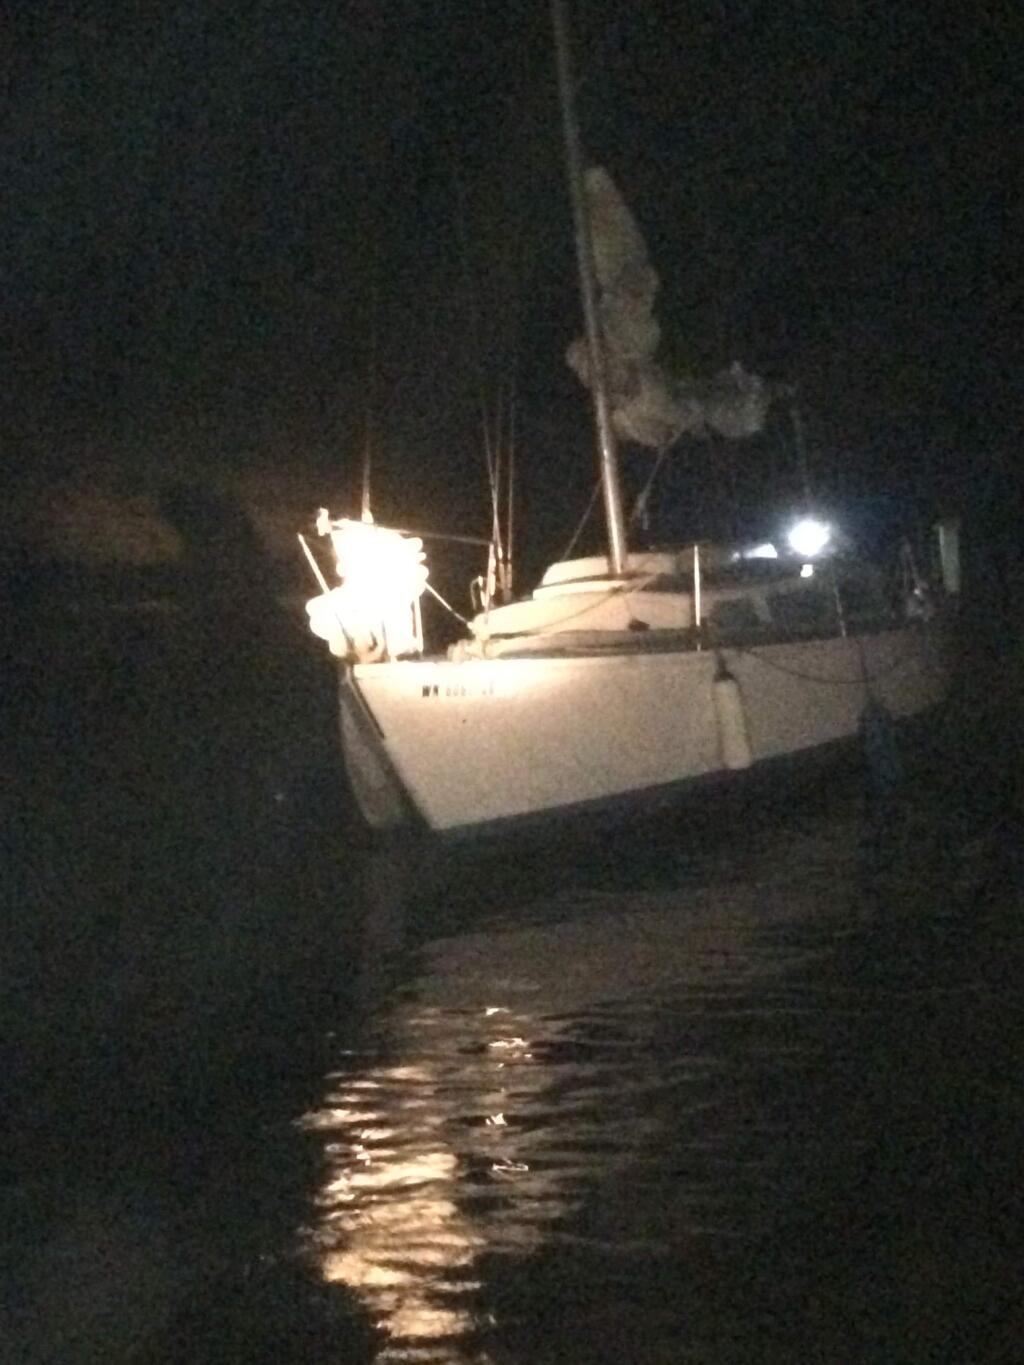 A sailboat washed ashore on Doran Beach early Saturday, July 23, 2016 when its skipper failed to set his anchor properly. ( BODGEGA BAY FIRE PROTECTION DISTRICT )